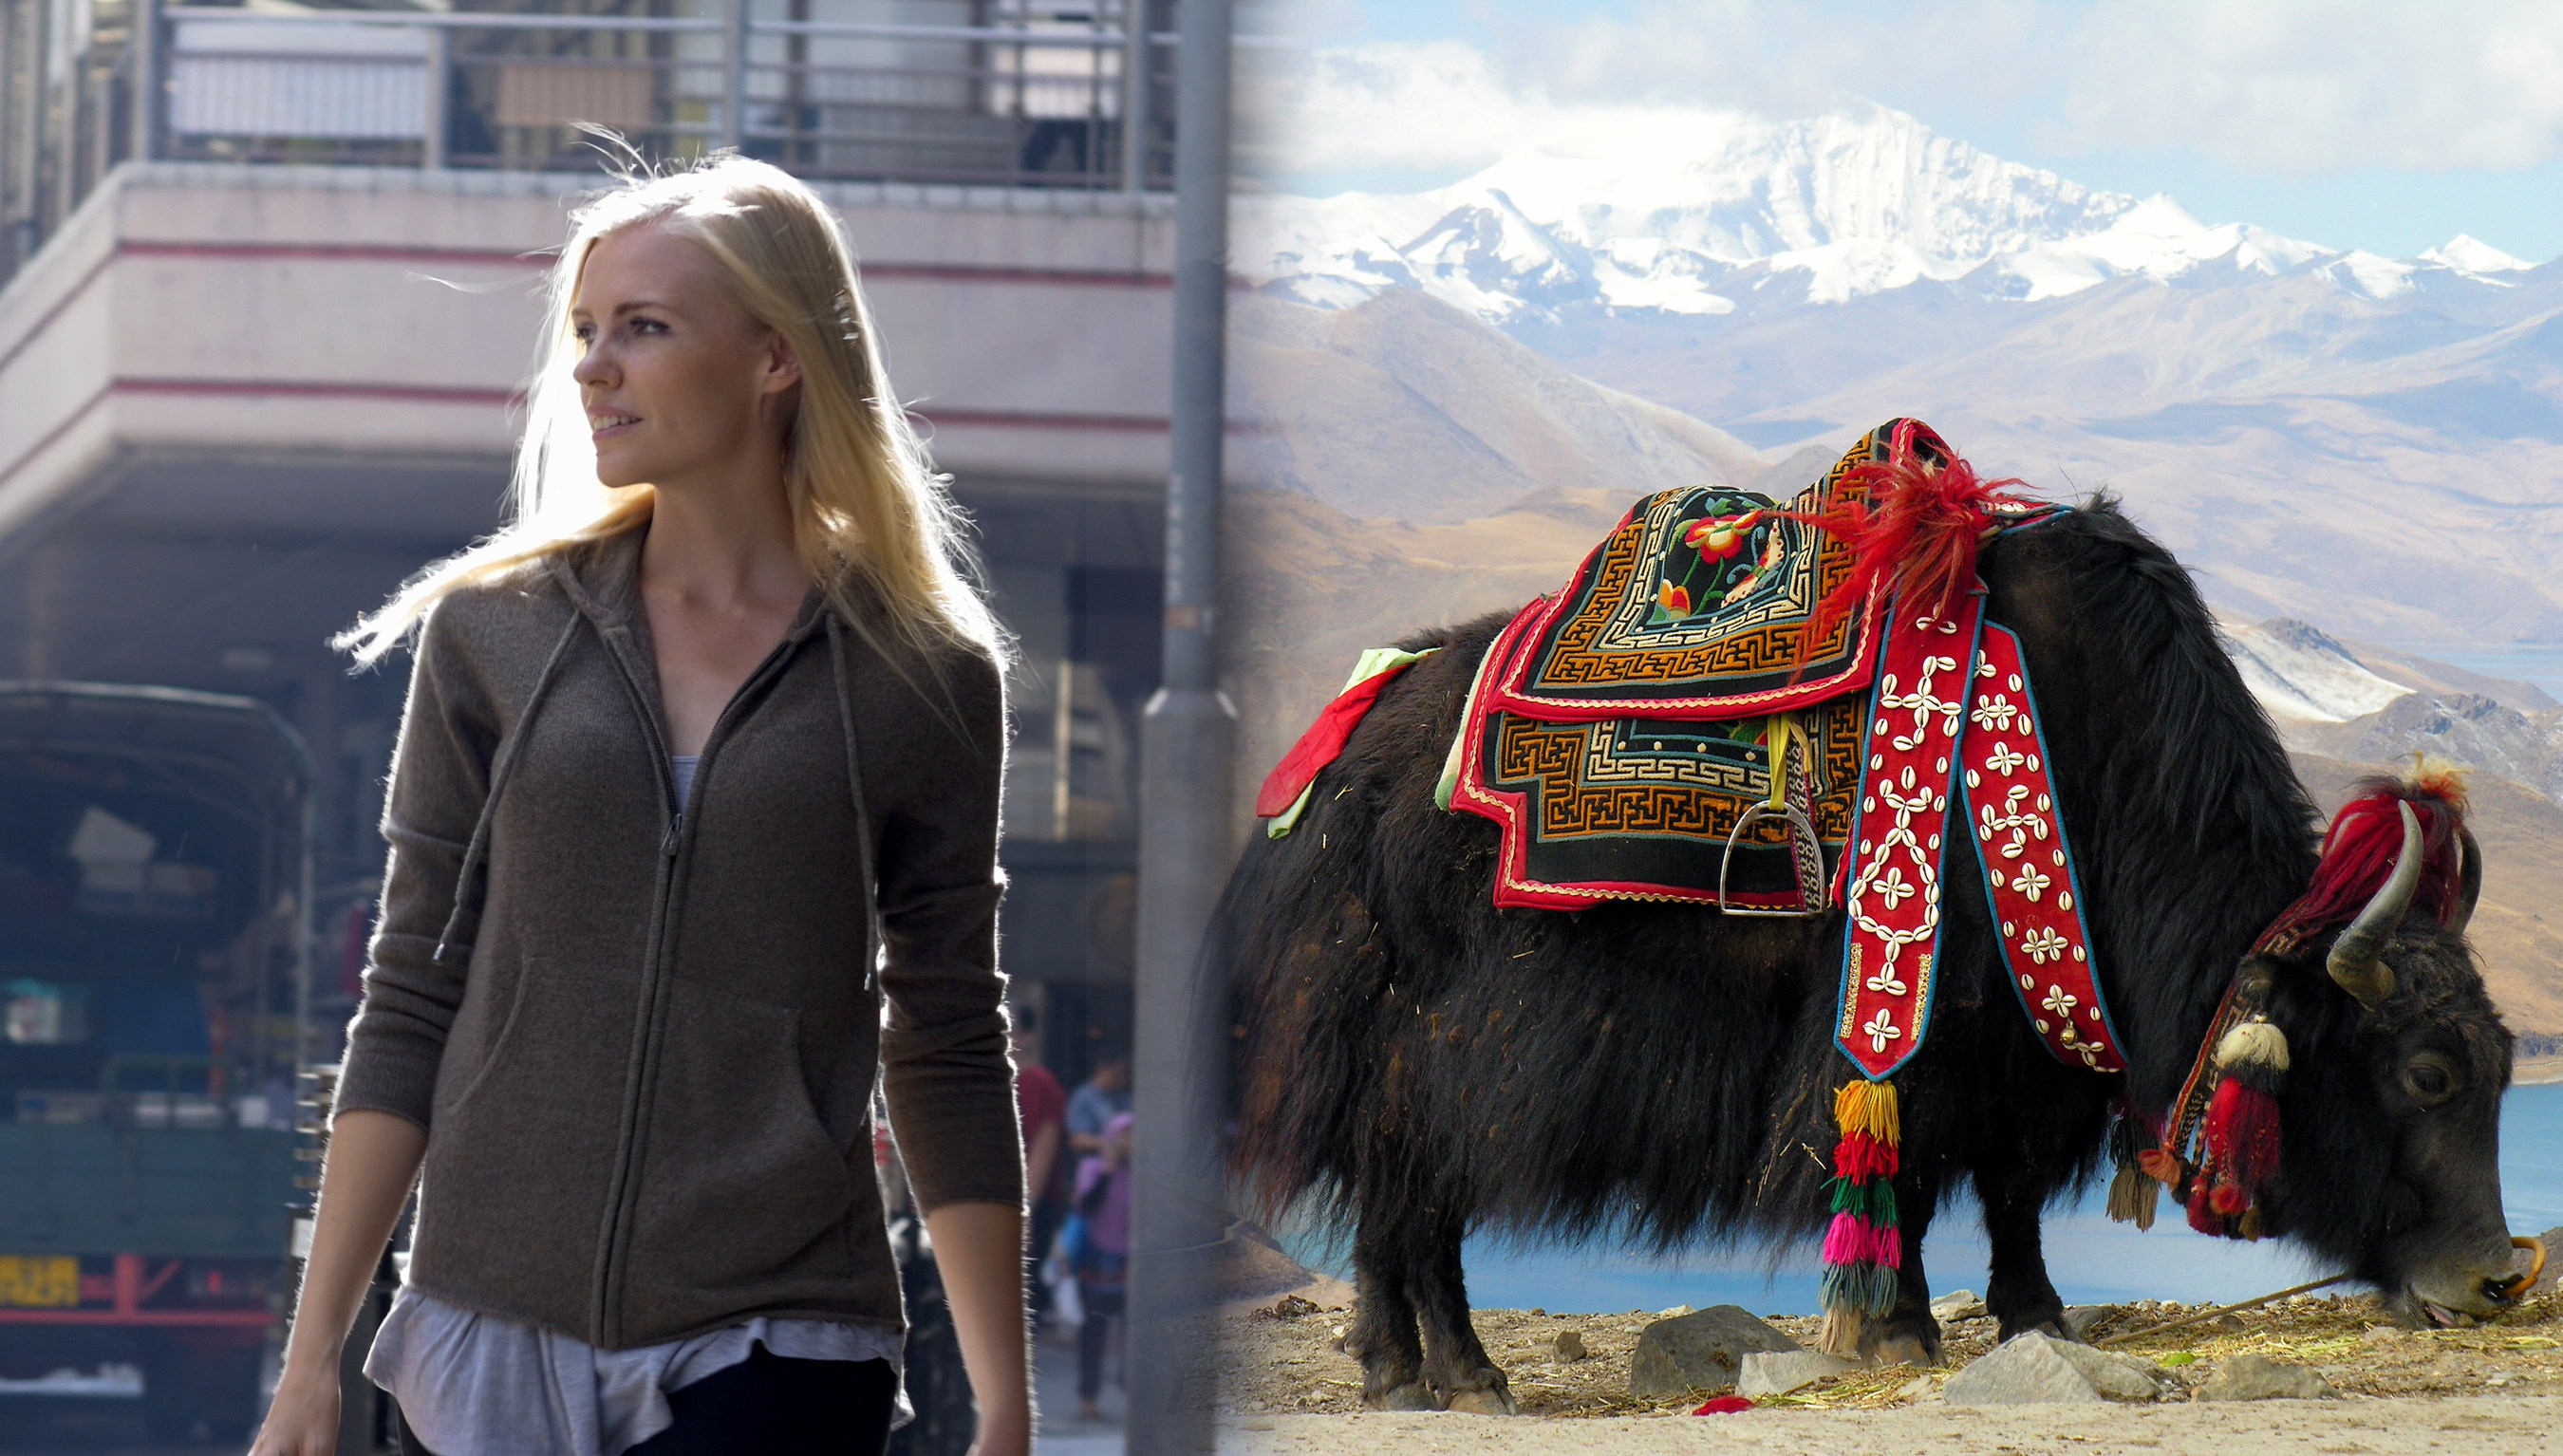 Citizen Cashmere aims to make ancient Tibetan wool hoodies the must-have Holiday accessory